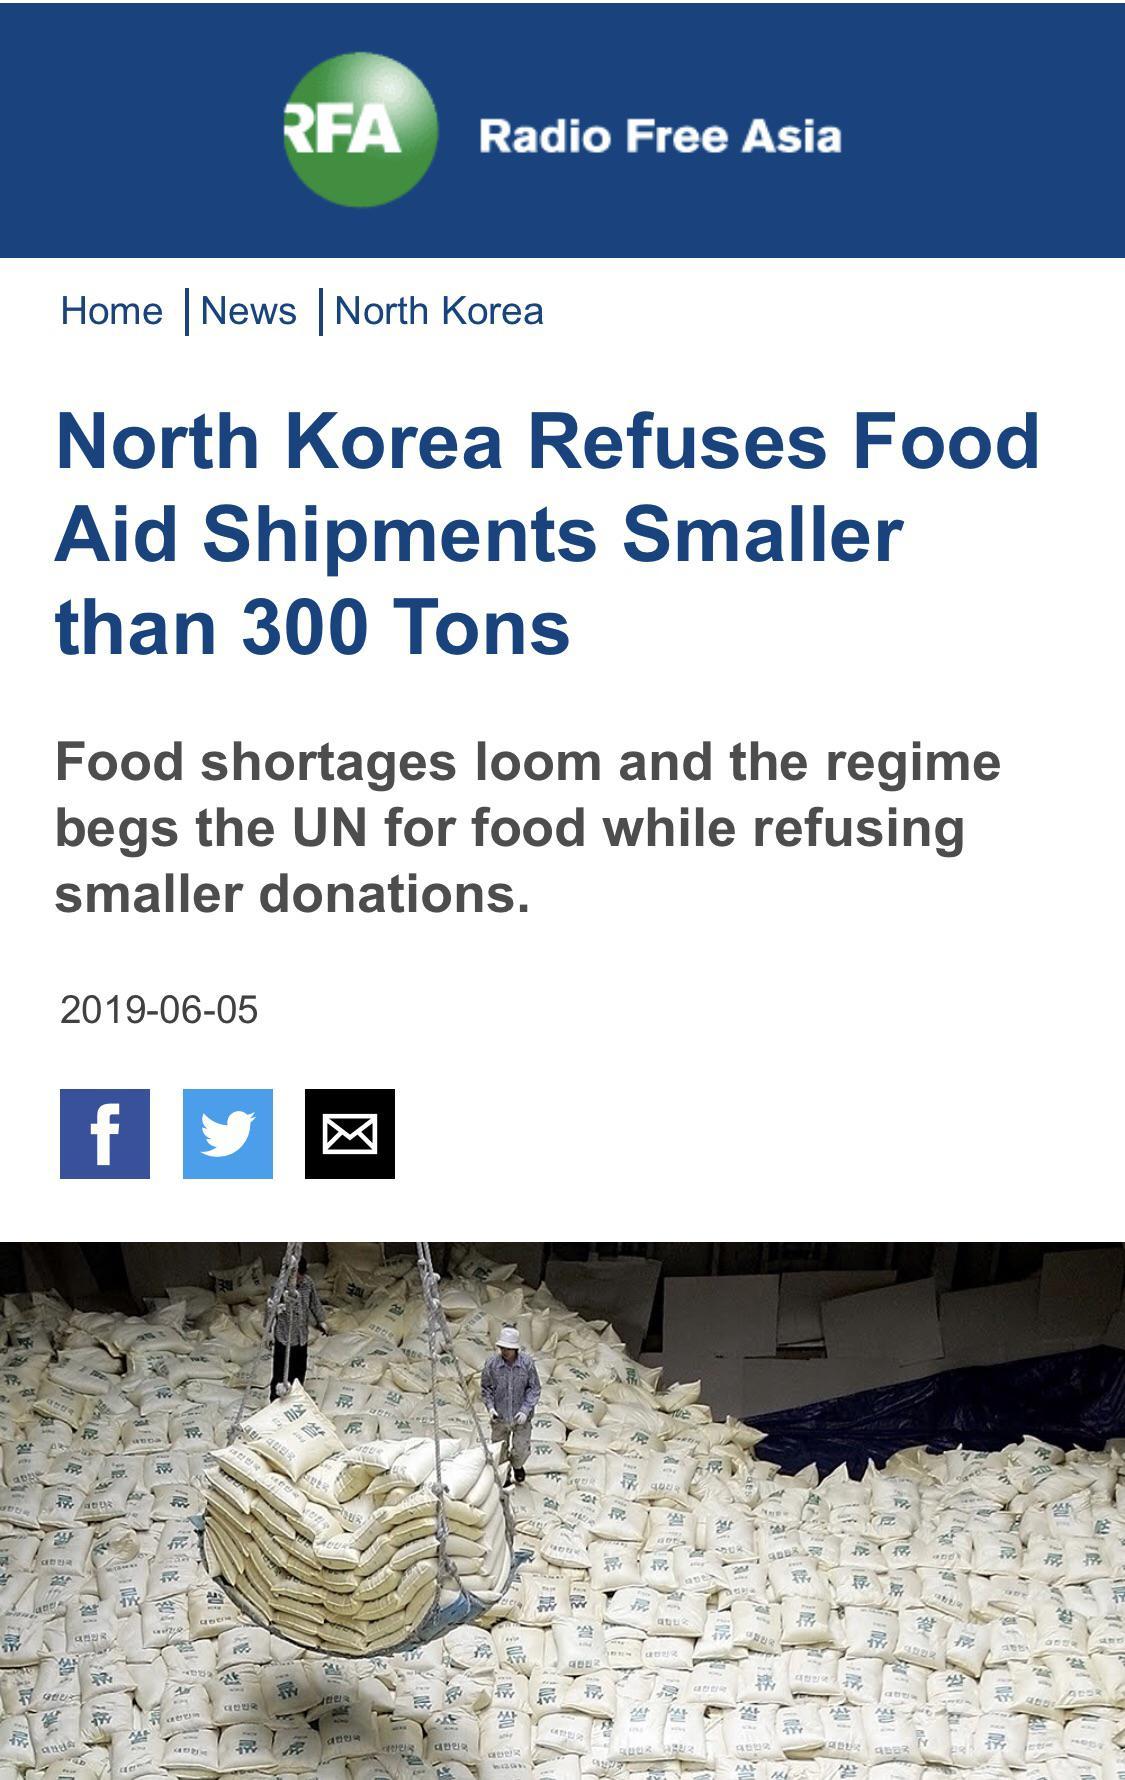 water resources - Rfa Radio Free Asia Home News | North Korea North Korea Refuses Food Aid Shipments Smaller than 300 Tons Food shortages loom and the regime begs the Un for food while refusing smaller donations. 3 an F 1003 DDB52 12 Der 30 13 ang Vens 19